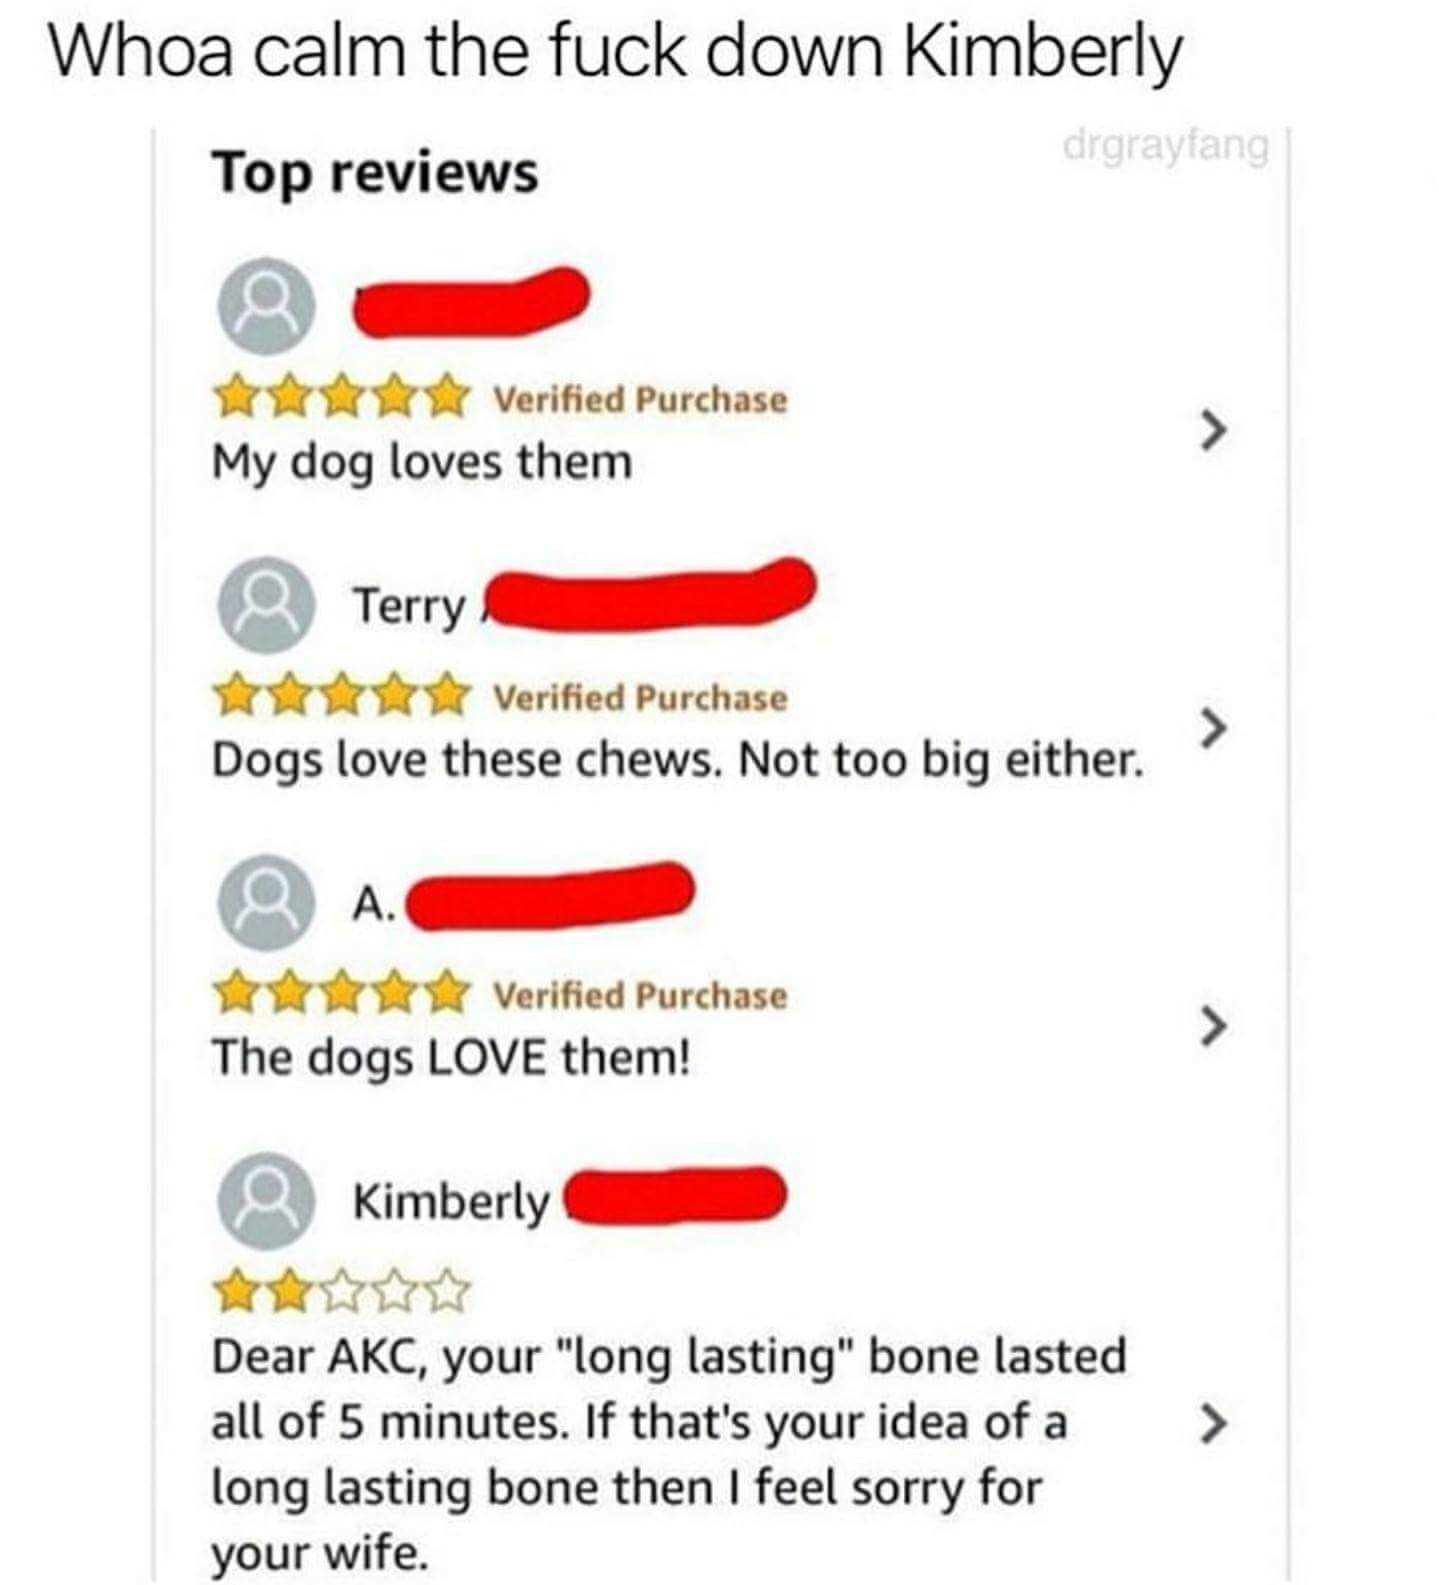 Dog - Whoa calm the fuck down Kimberly Top reviews drgrayfang Verified Purchase My dog loves them a Terry Verified Purchase Dogs love these chews. Not too big either. a Verified Purchase The dogs Love them! Kimberly Dear Akc, your "long lasting" bone last